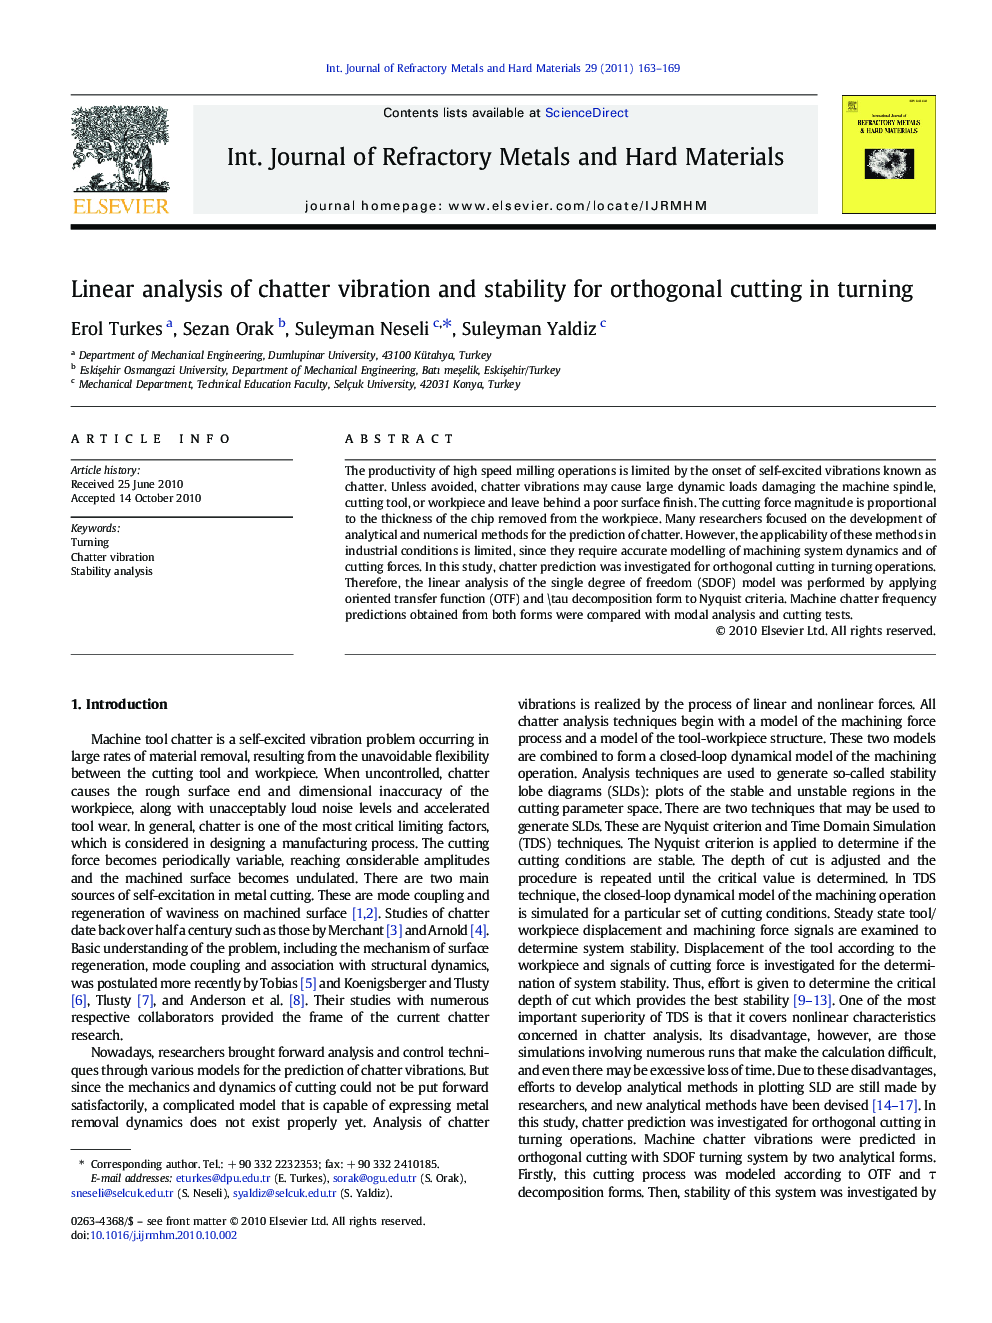 Linear analysis of chatter vibration and stability for orthogonal cutting in turning